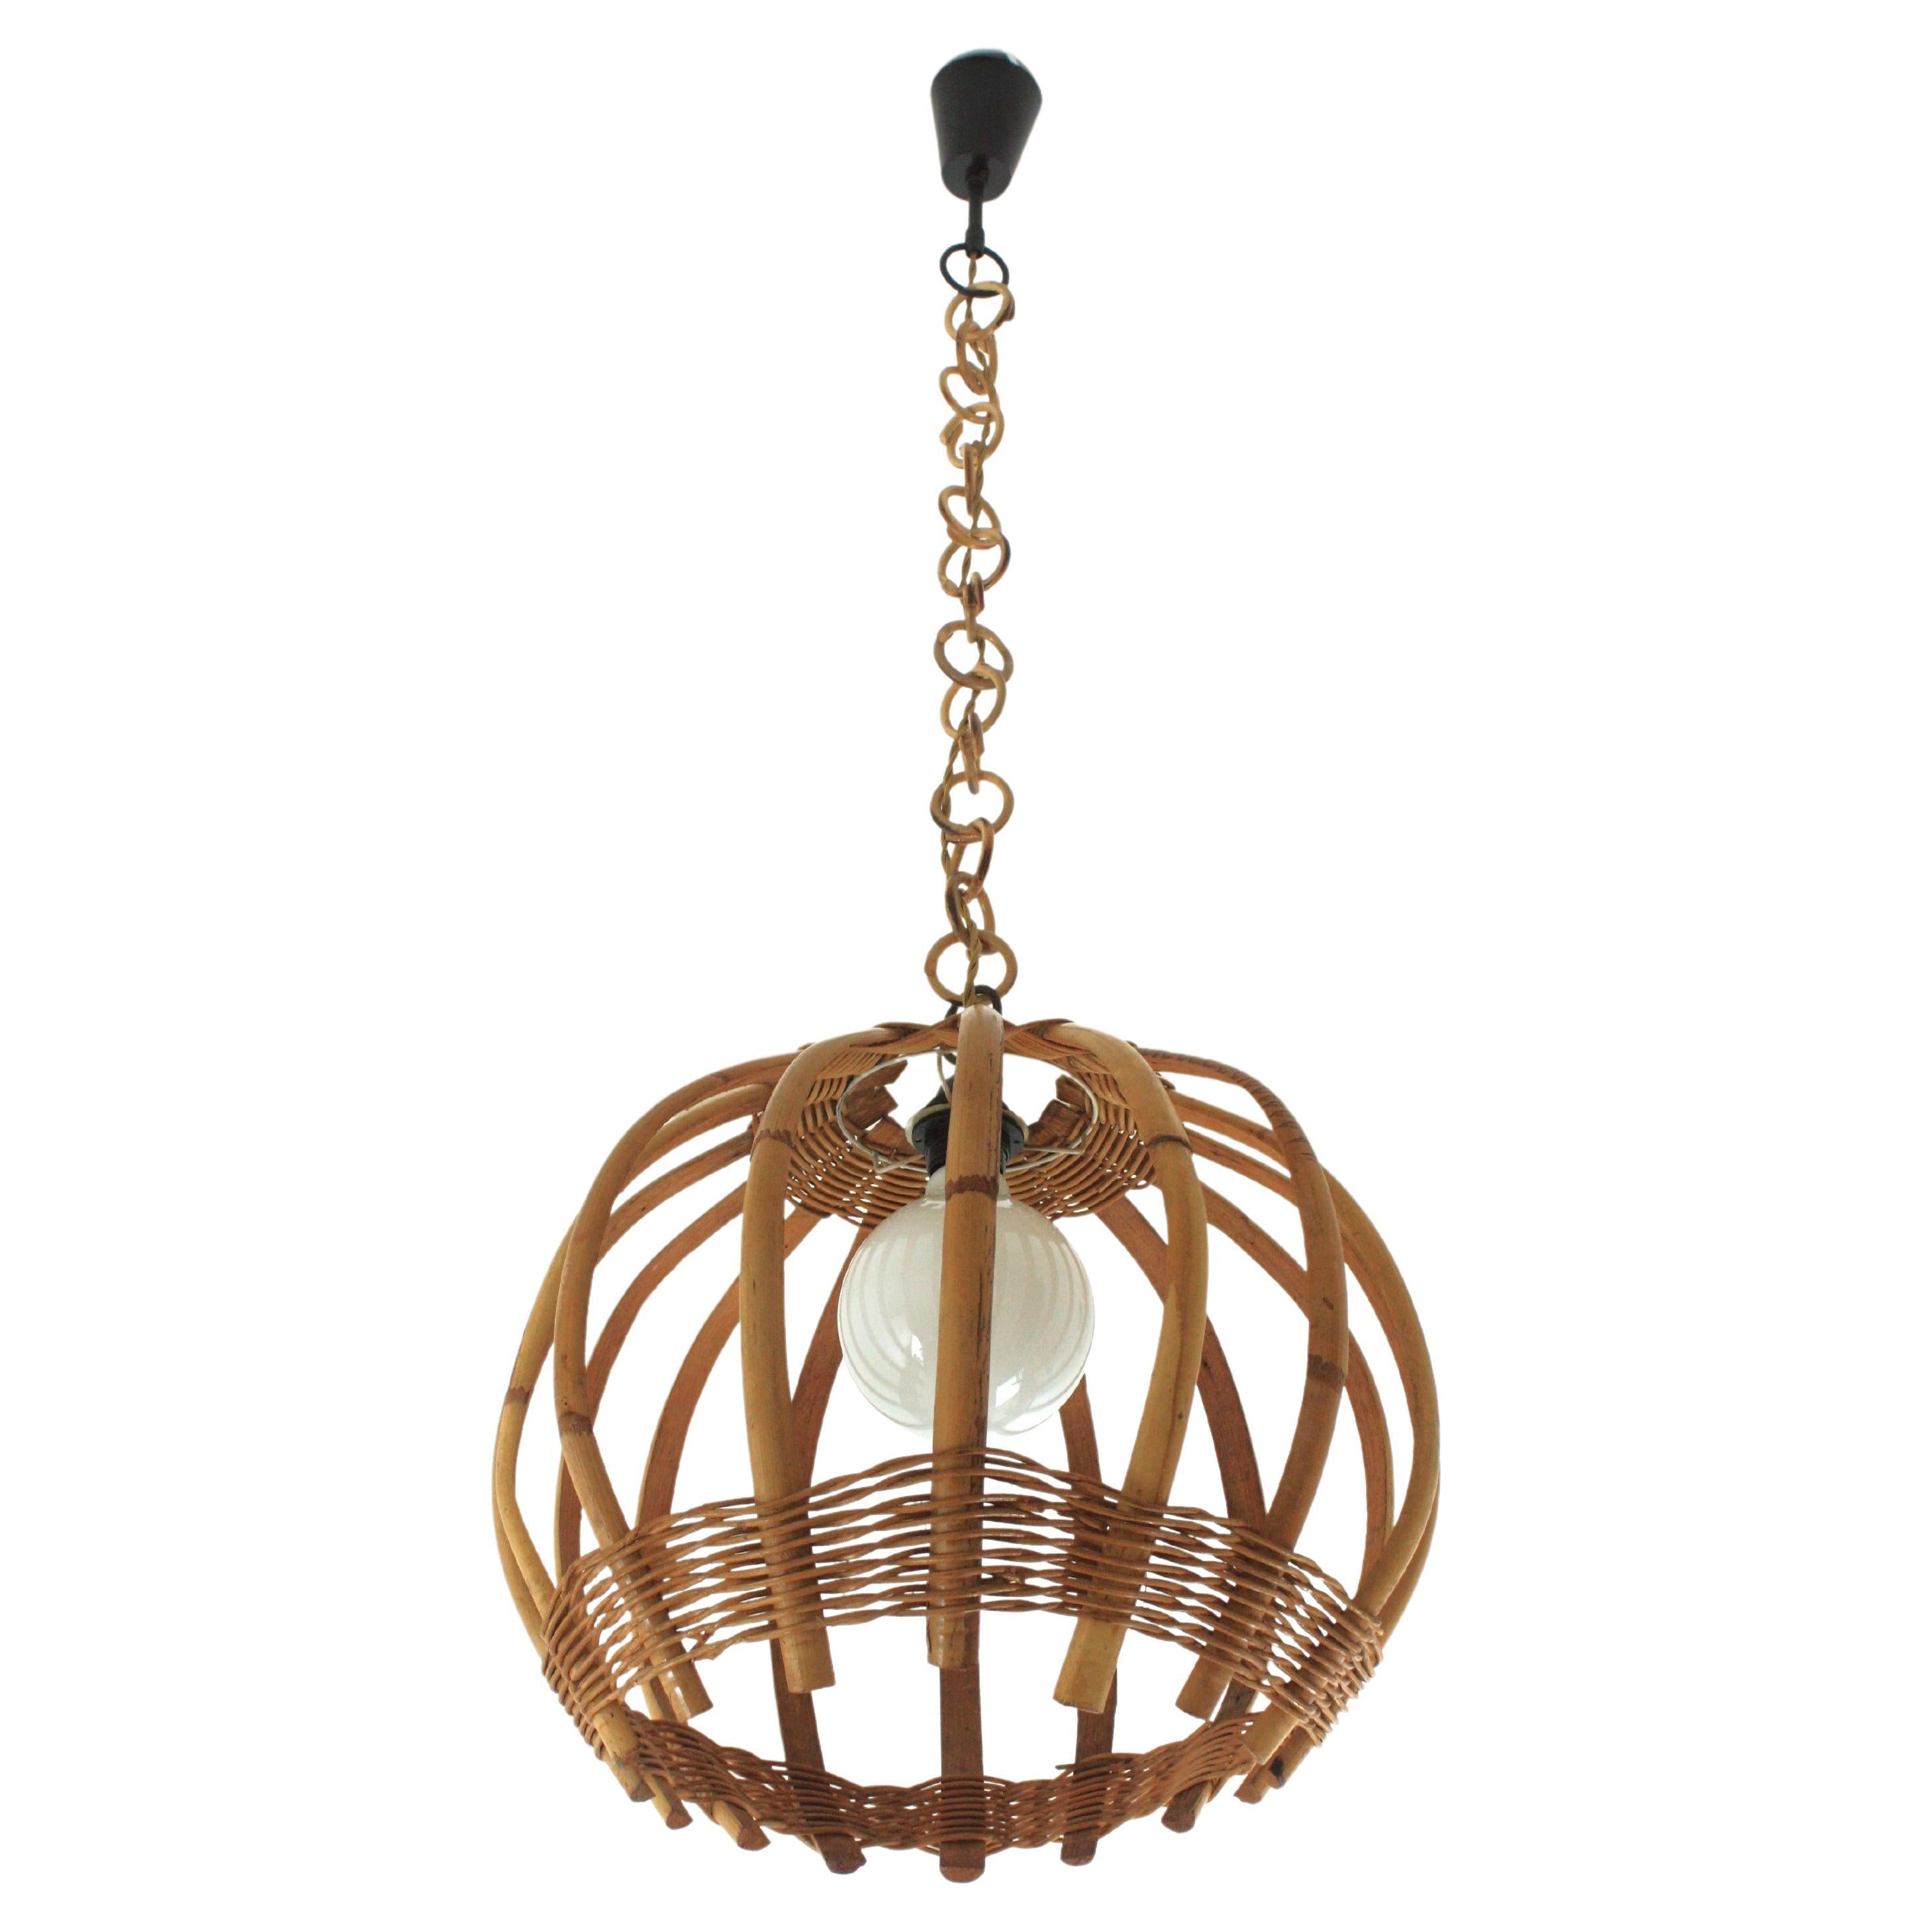 1960s Large Bamboo Rattan Round Shaped Pendant Light with Woven Wicker Detail